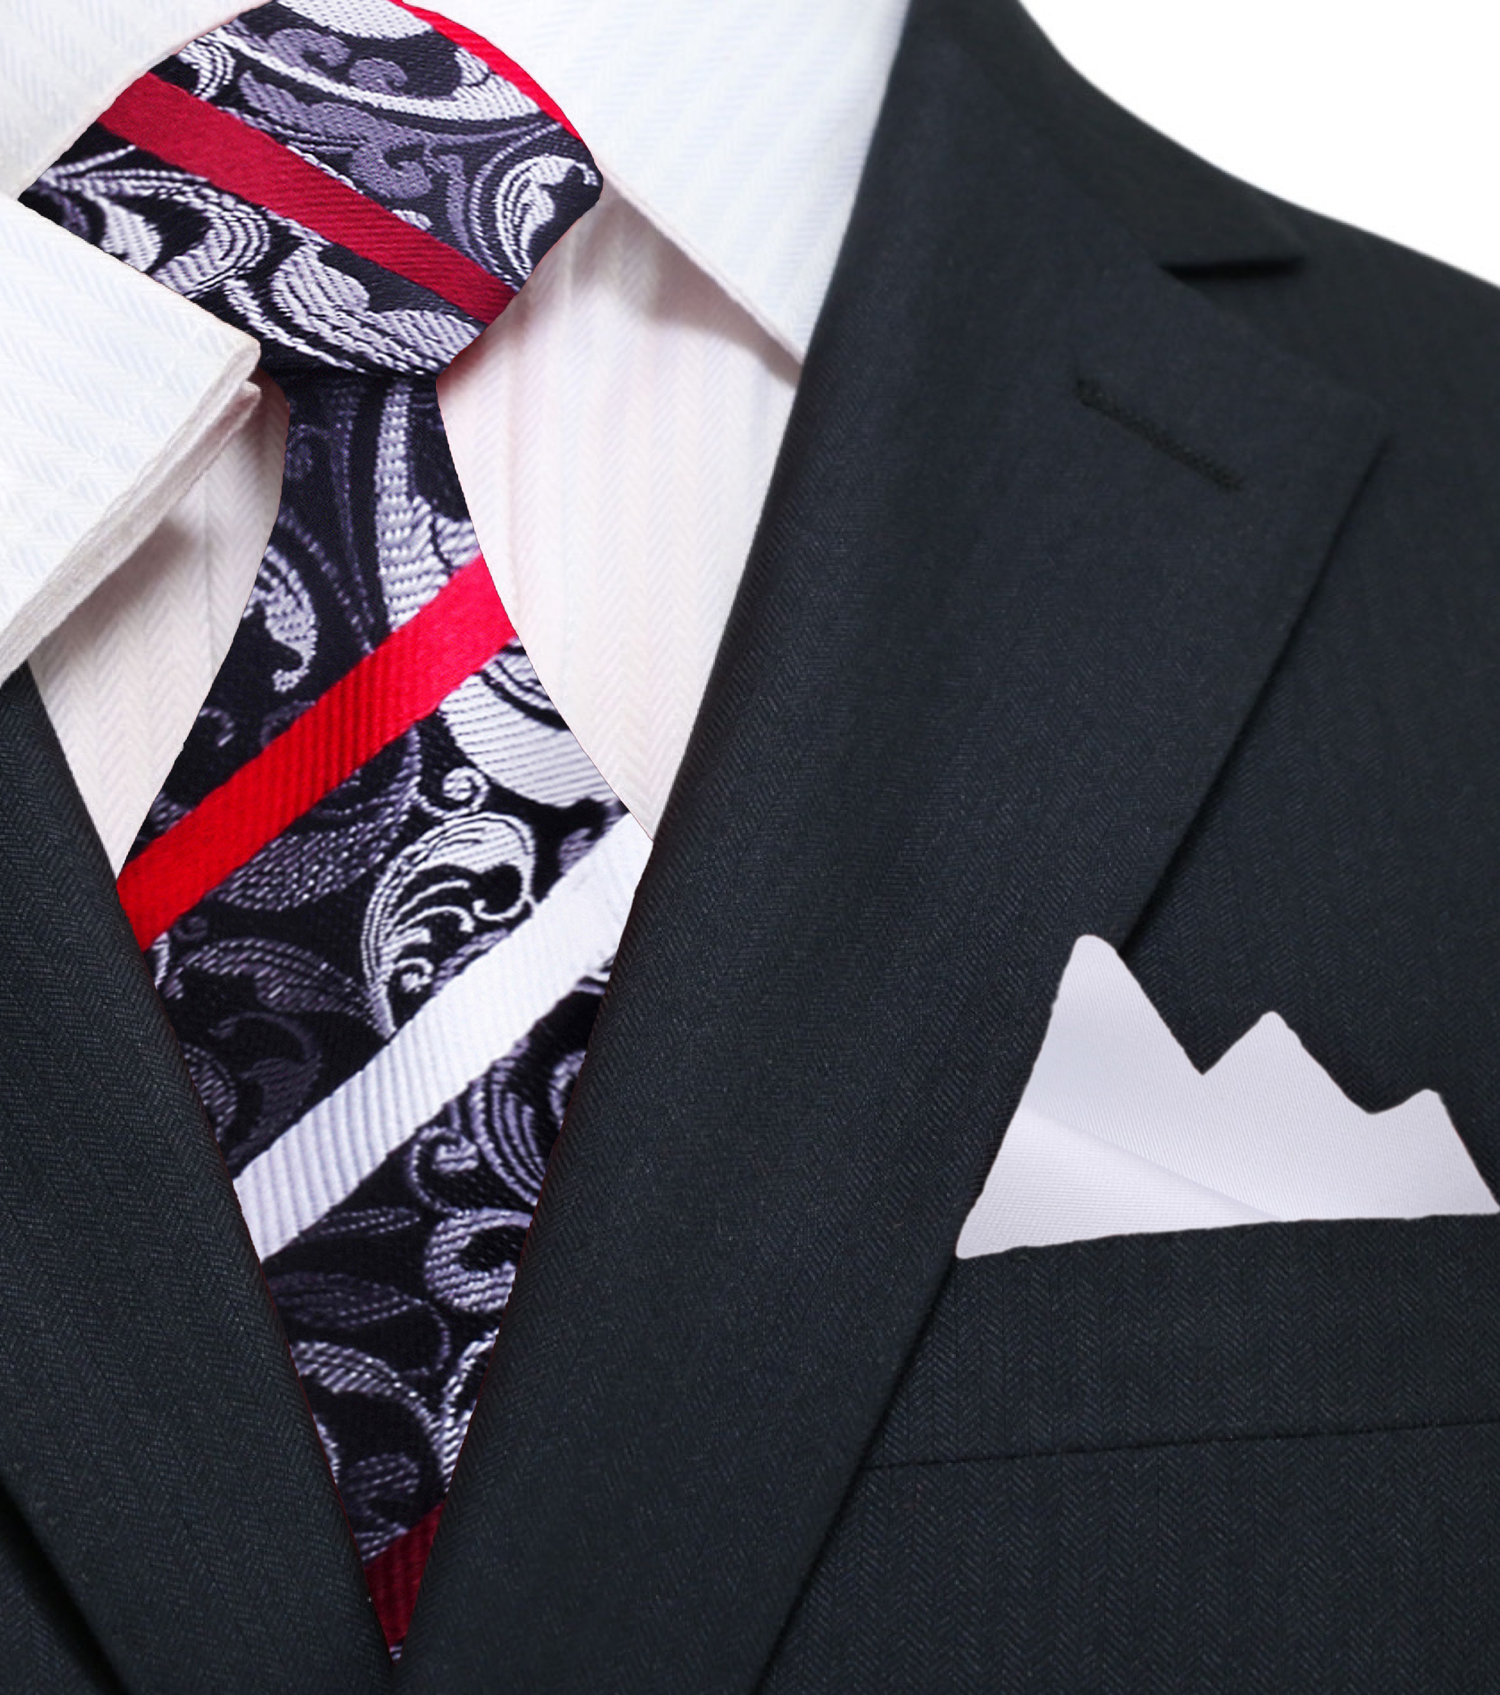   Grey, Black, White and Red Floral with Stripe Tie and White Pocket Square